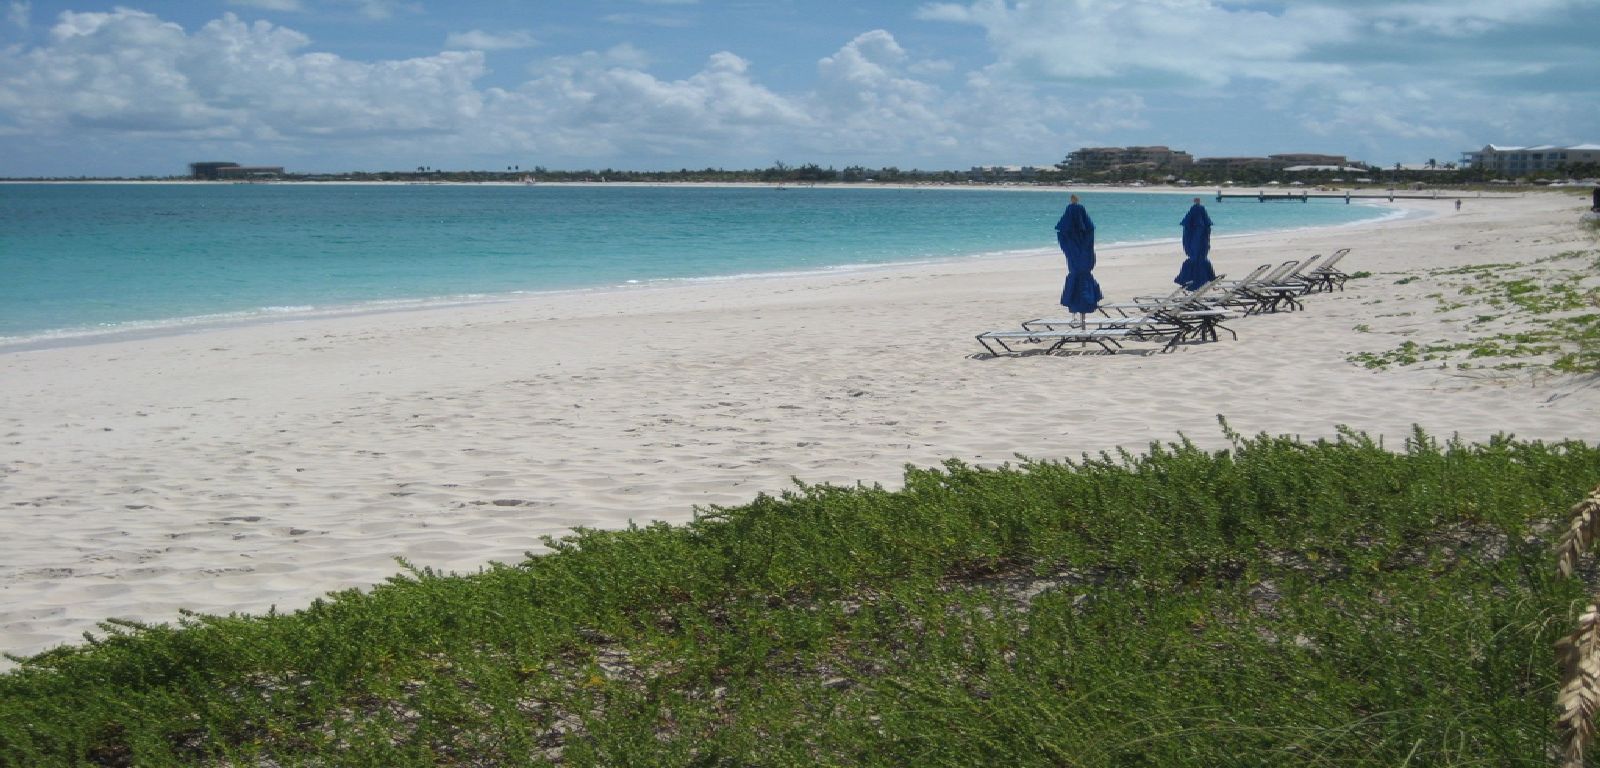 View of Grace Bay beach and beach chairs